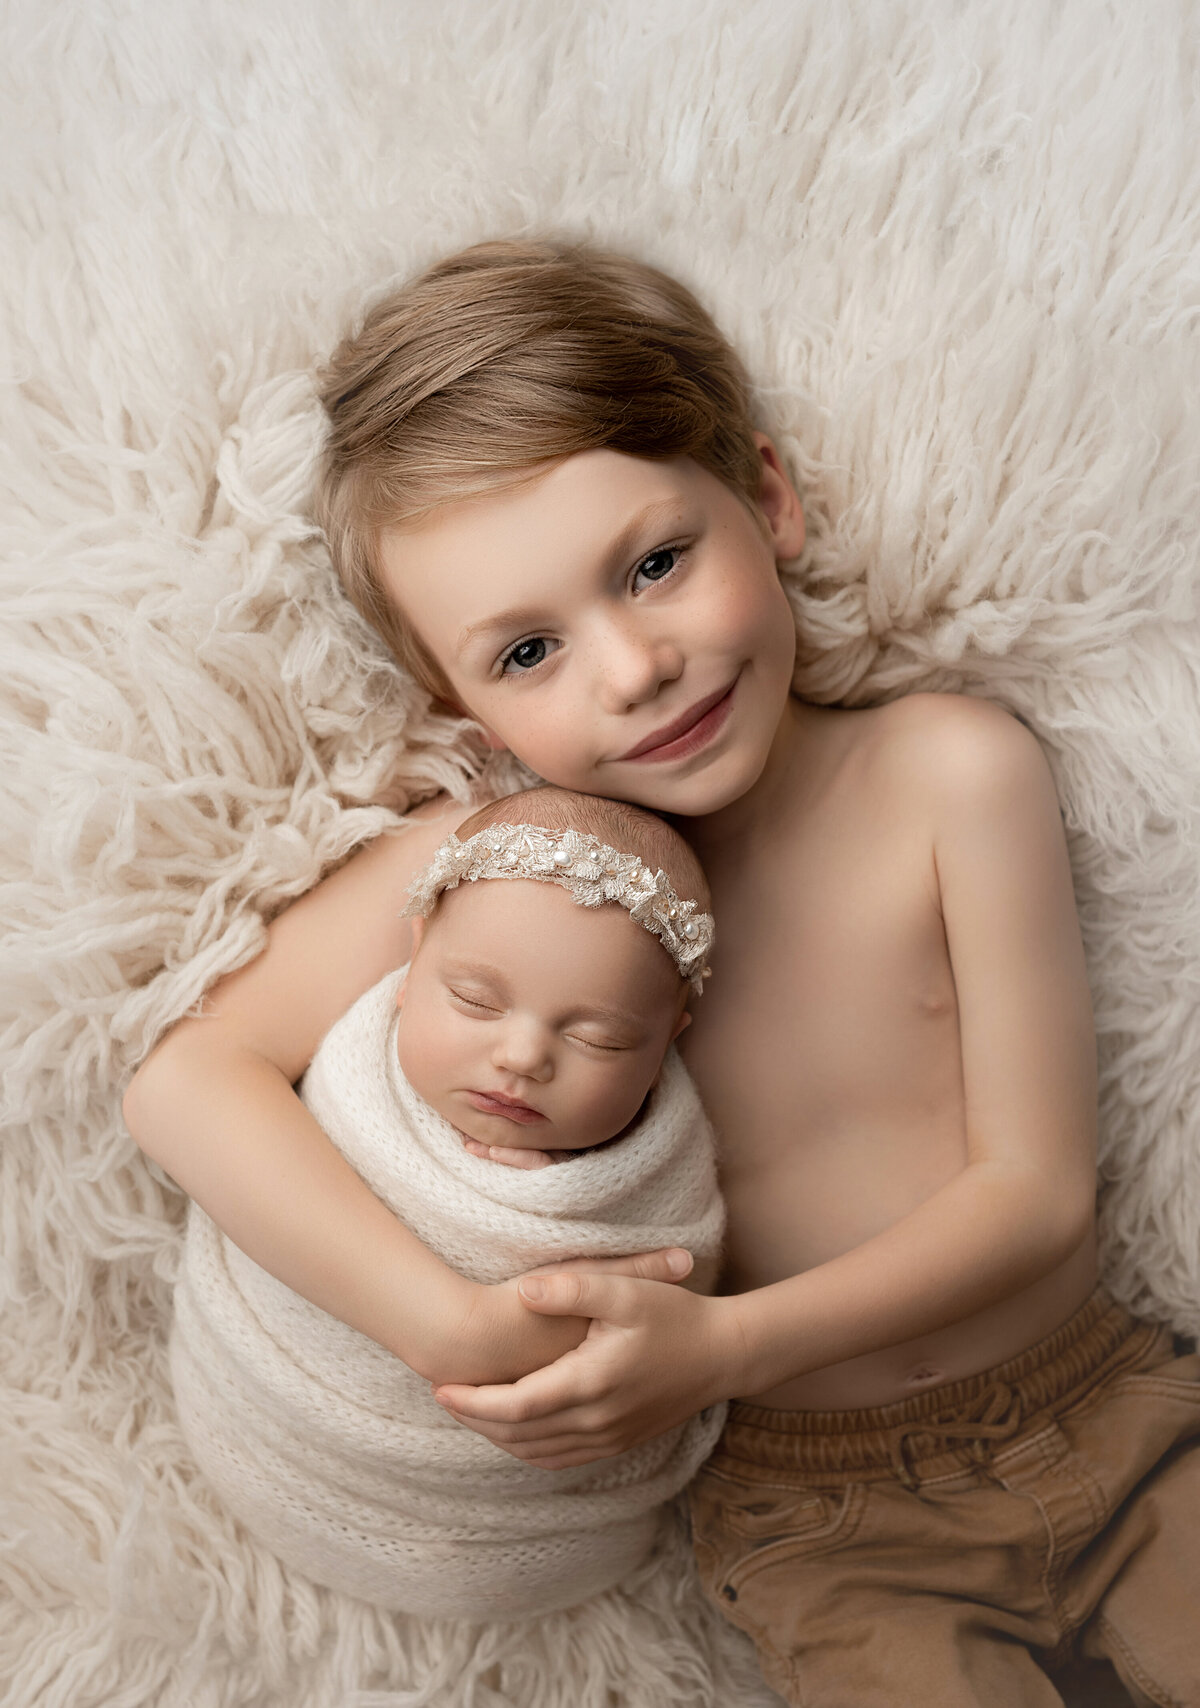 Philadelphia's best newborn photographer, Katie Marshall captures an aerial image of a bare-chested big brother holding his new baby sister. The brother is looking at the camera with his arms wrapped around baby. Baby sister is swaddled in cream with a matching lace and pear-embellished headband.